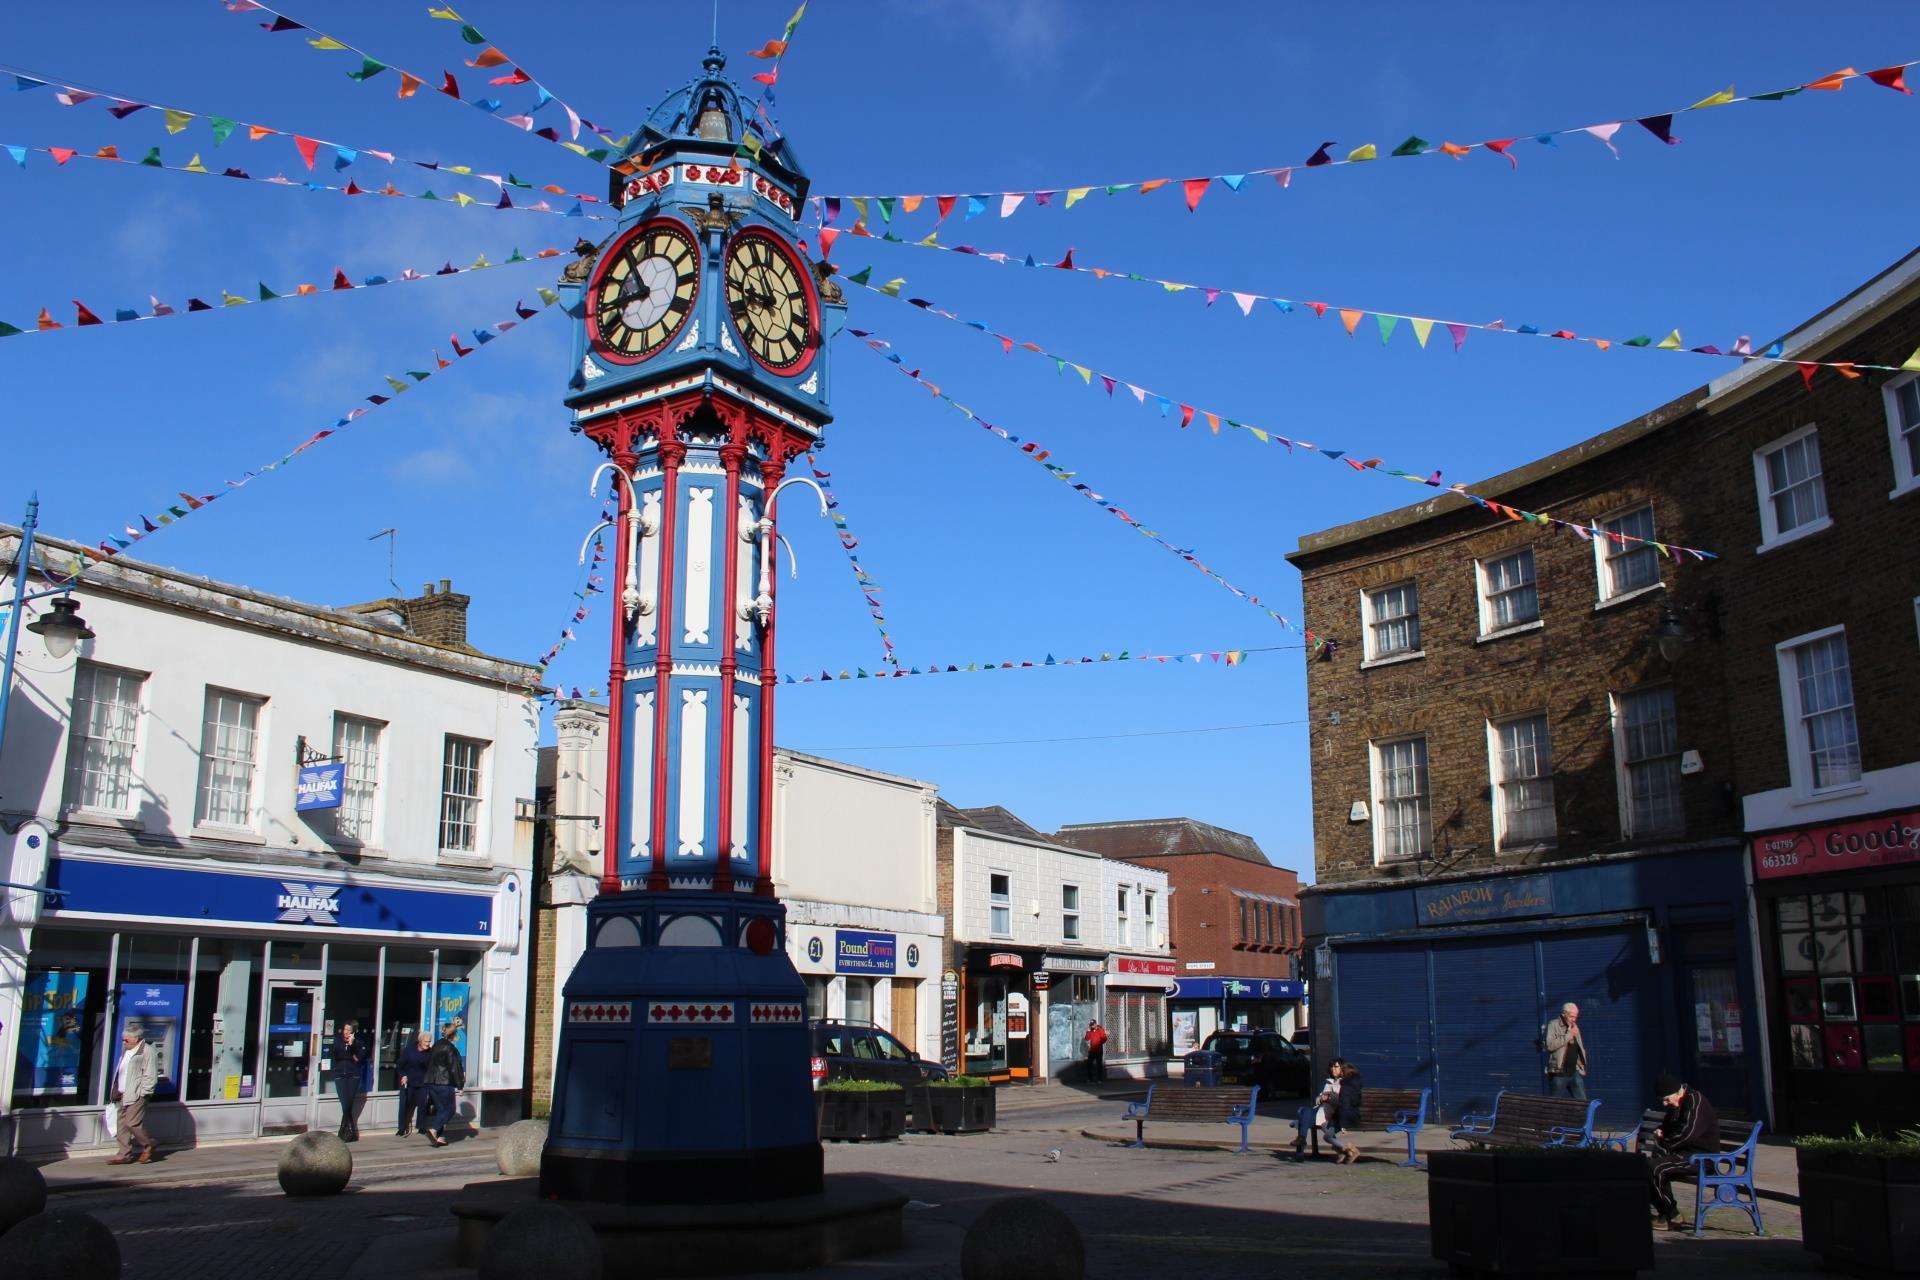 Sheerness clock tower on the Isle of Sheppey (1542345)